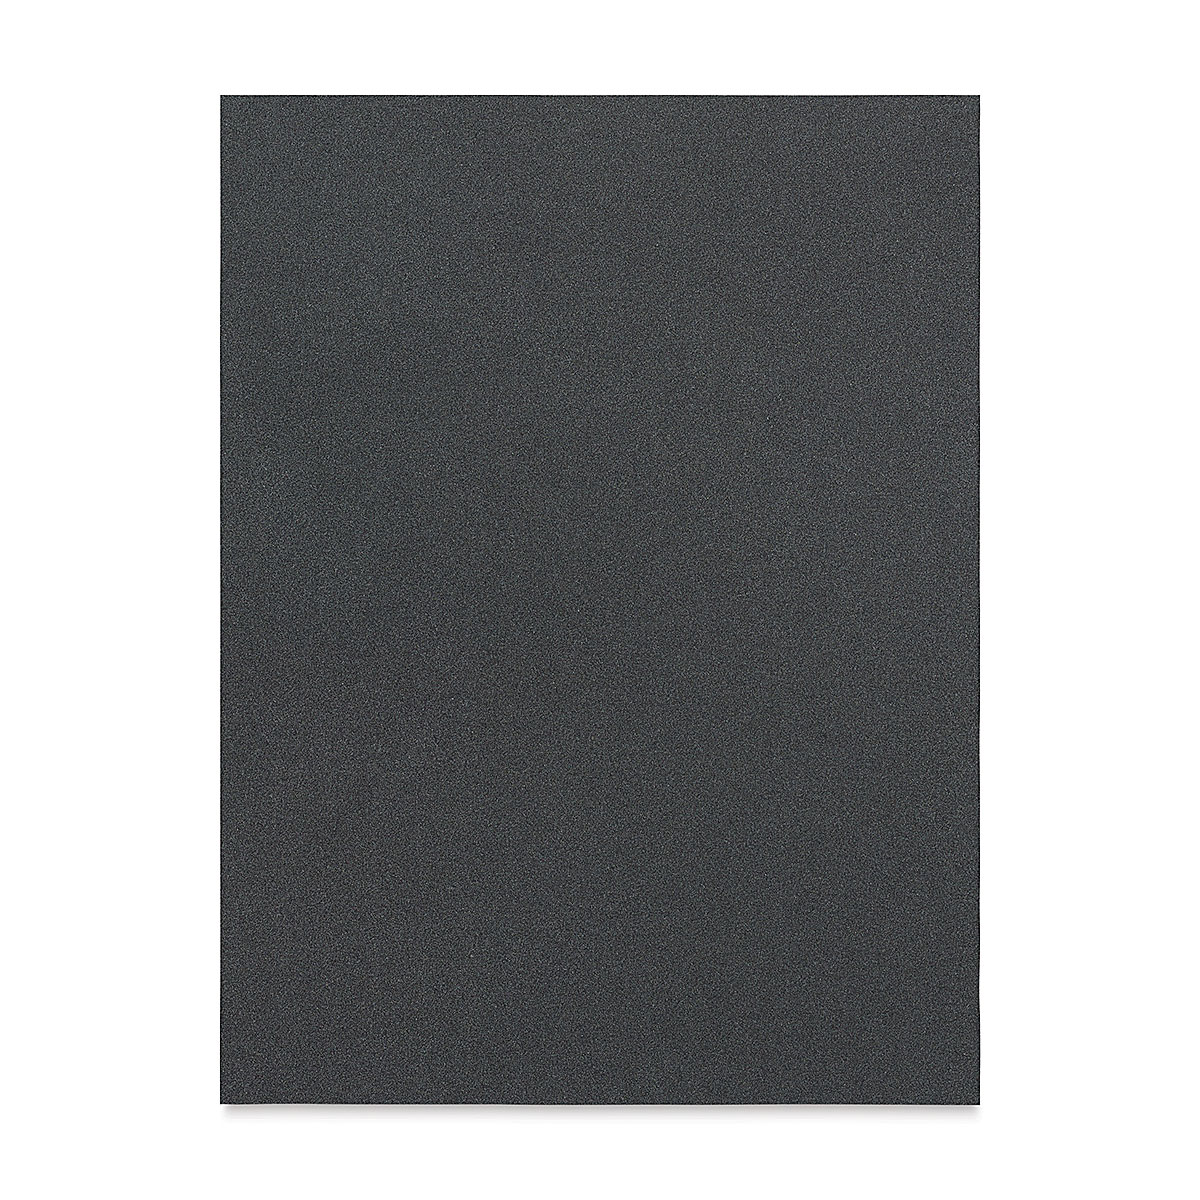 Clairefontaine Pastelmat Pad - 9-1/2 x 12, White, 12 Sheets